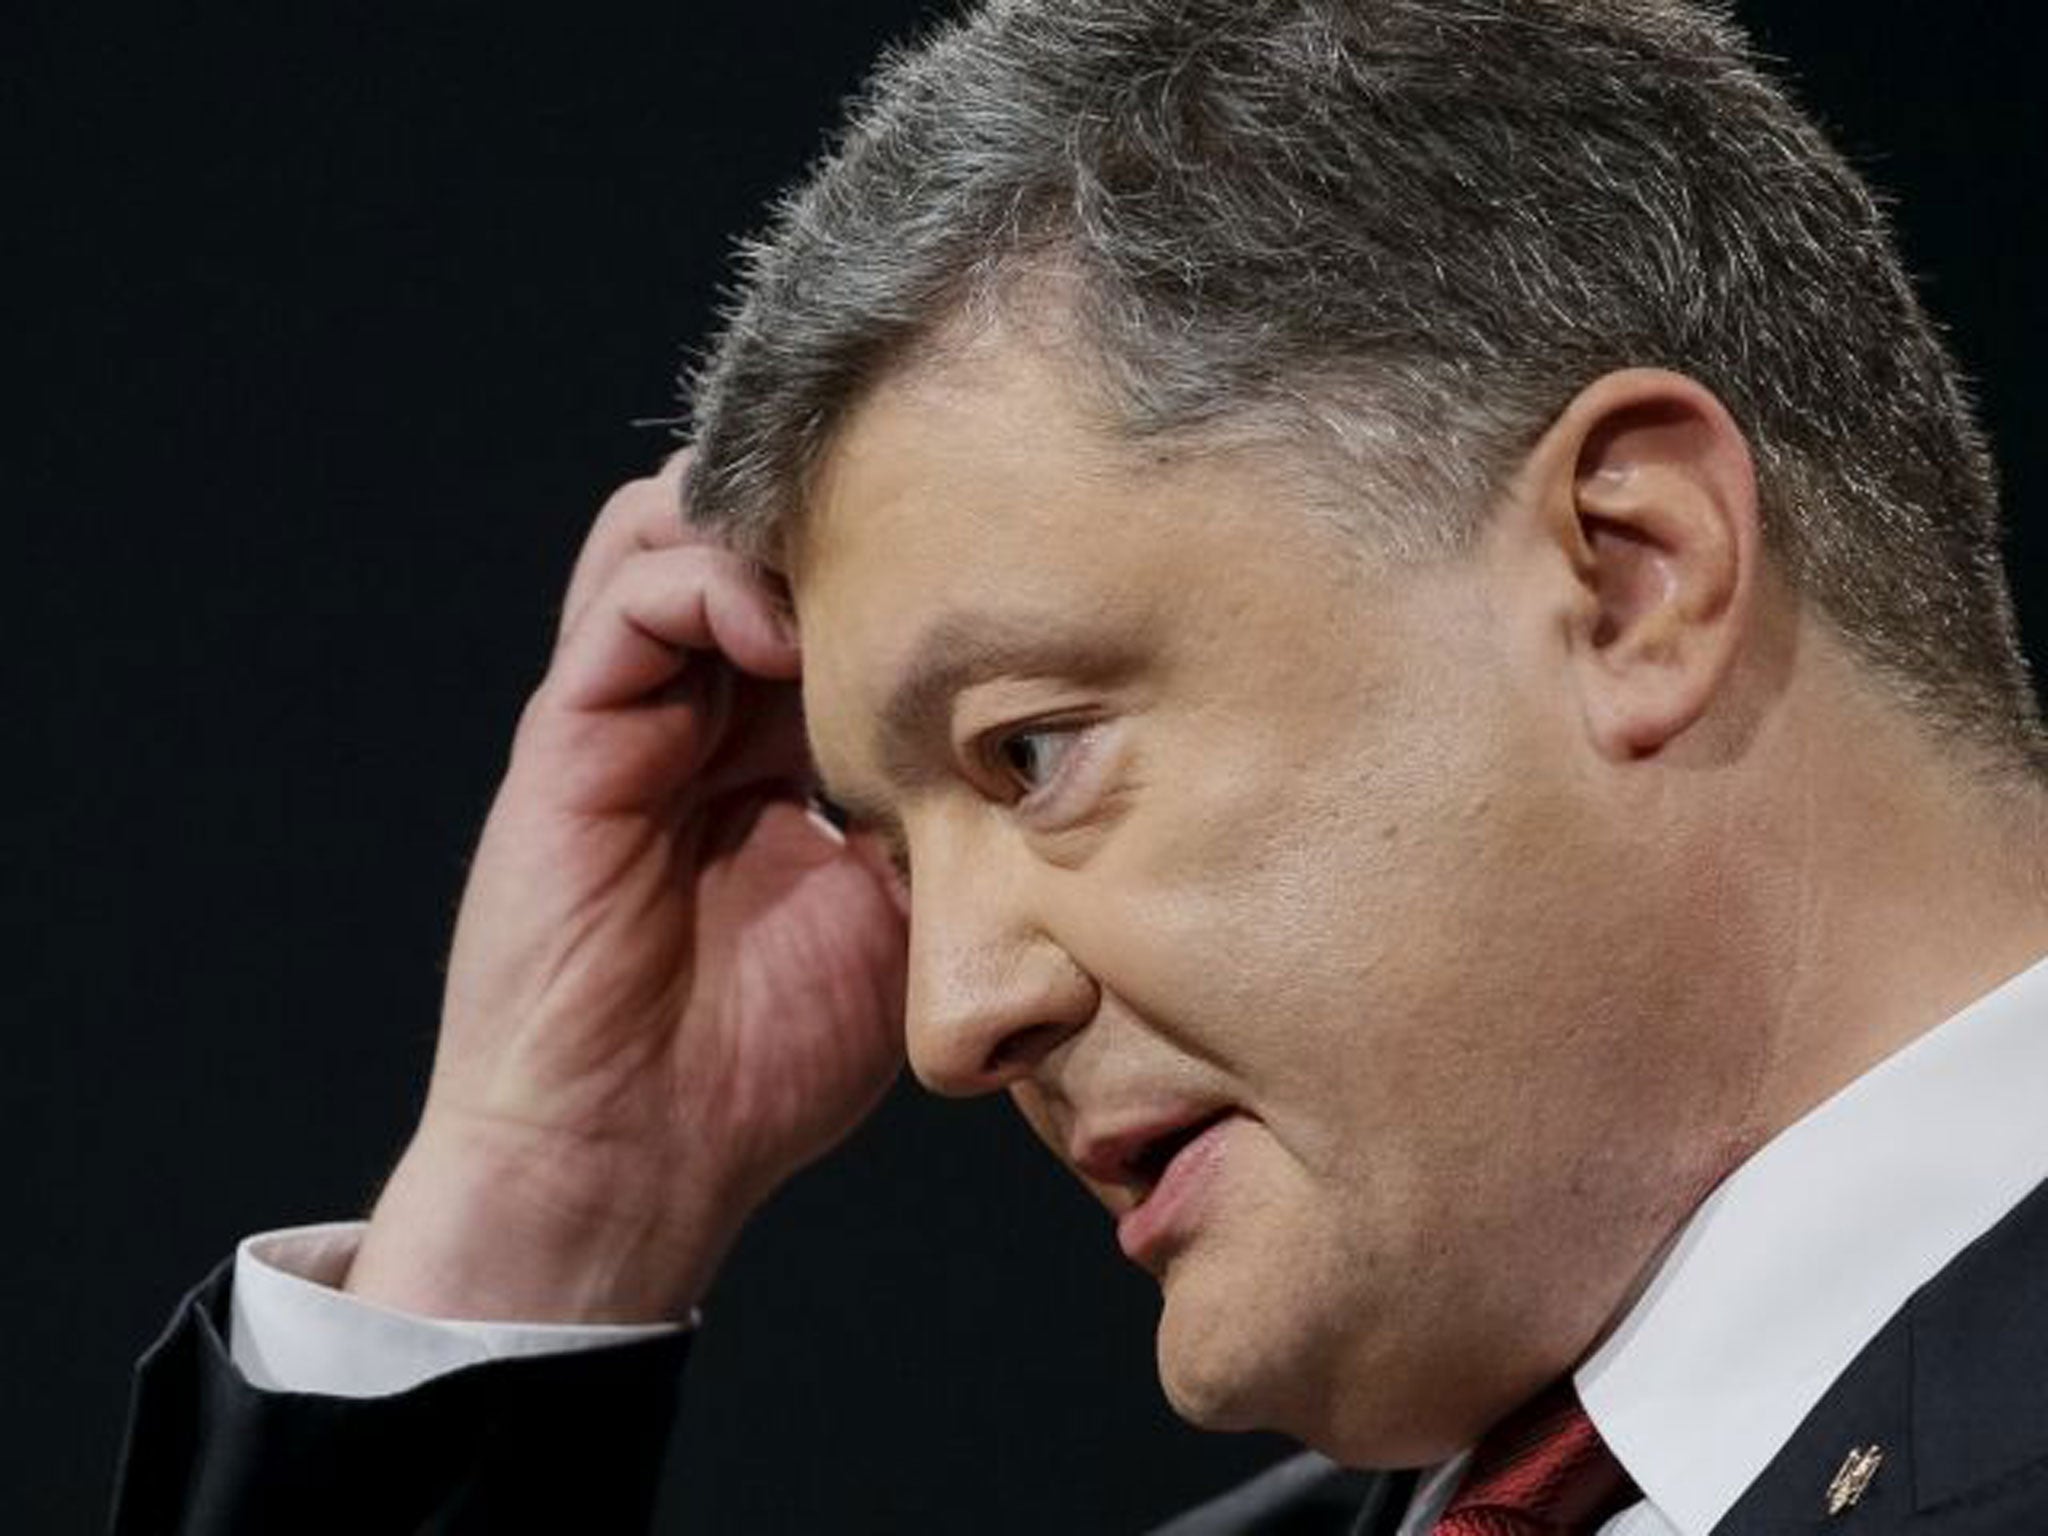 Ukrainian President Poroshenko has been promoted by the EU and the US as an anti-corruption champion